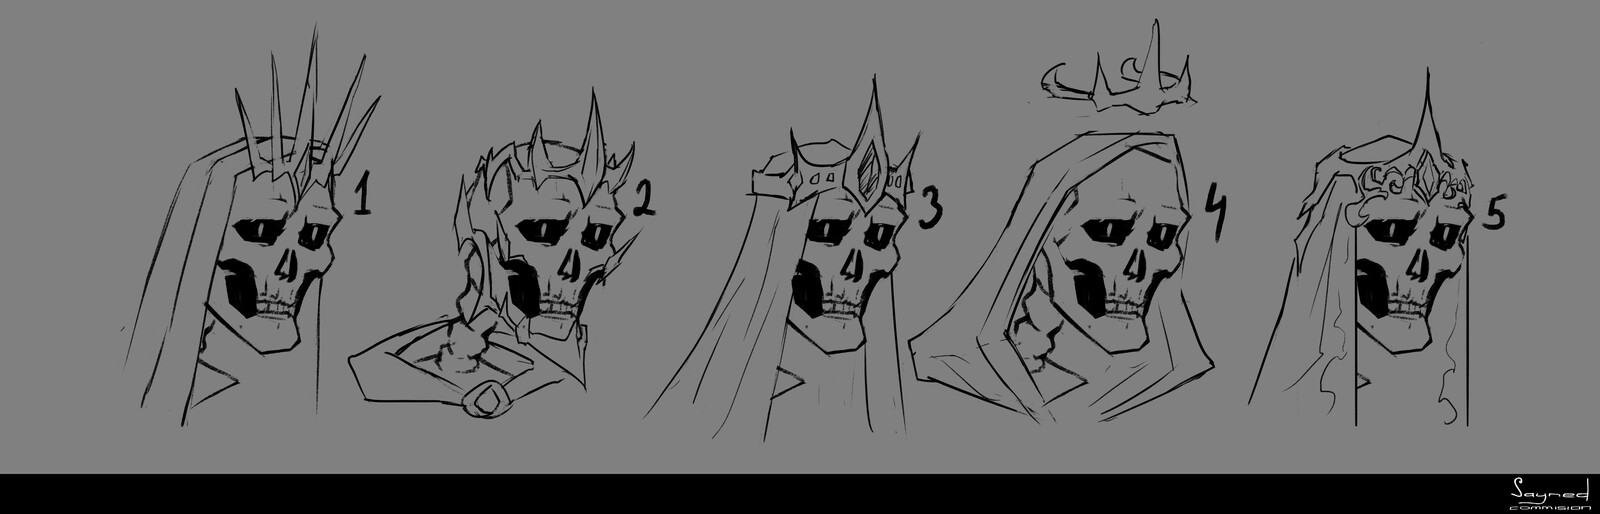 head design exploration, picked combo of 5 and 4